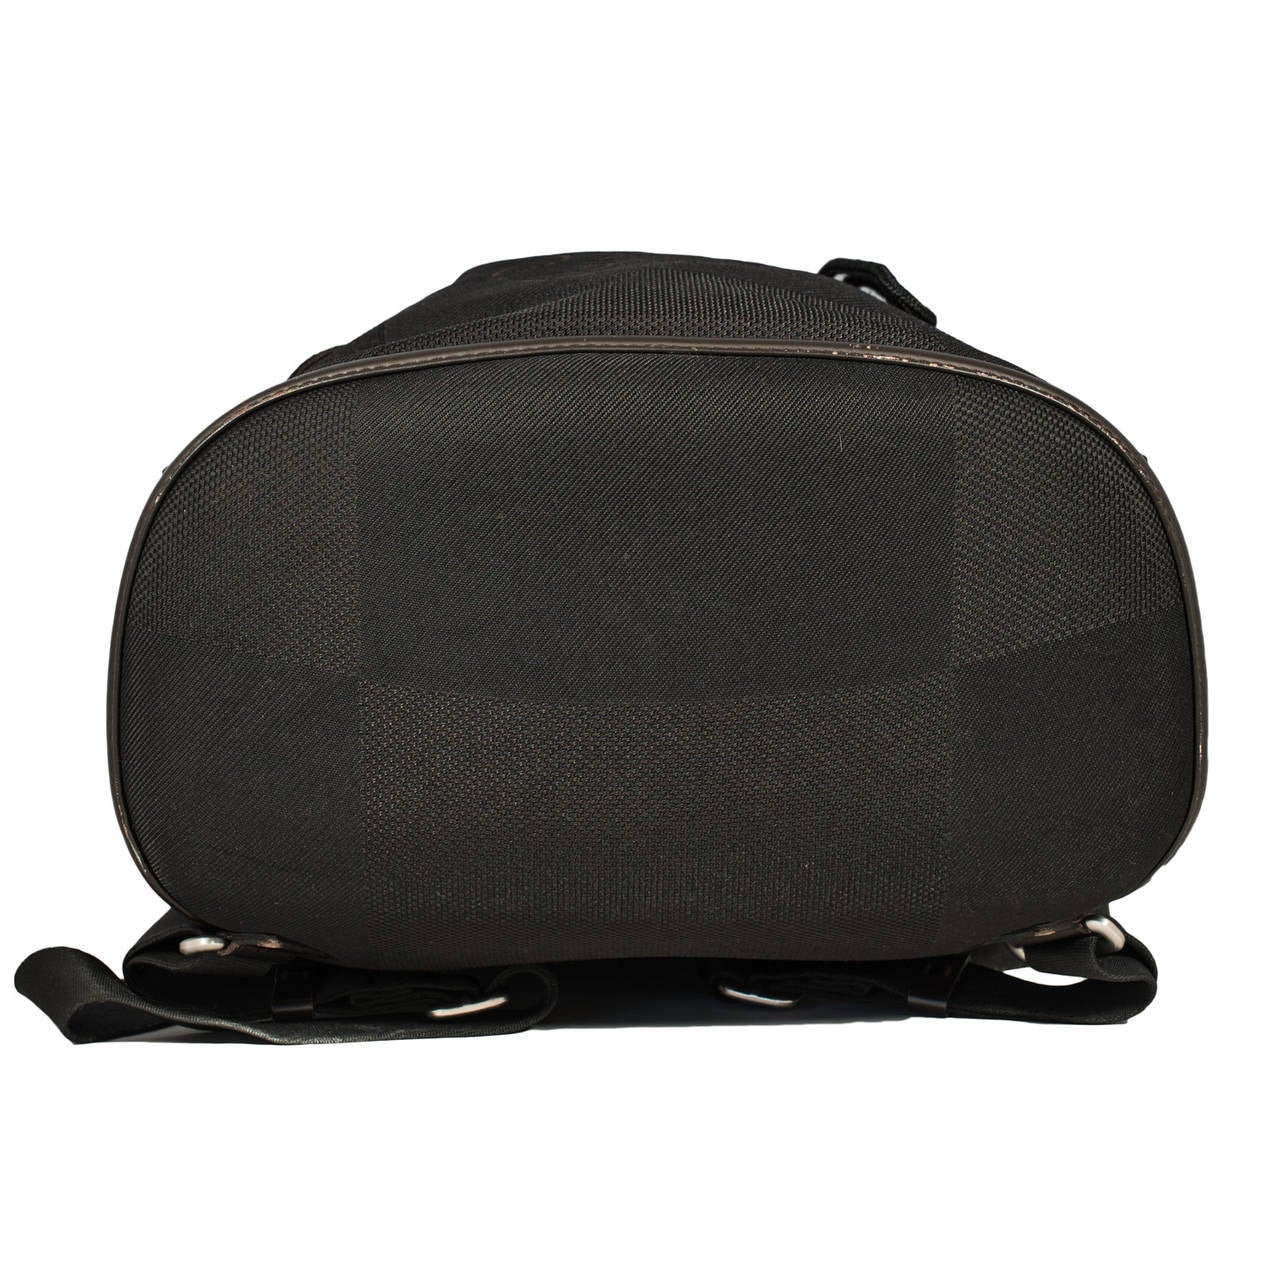 geant pionnier backpack